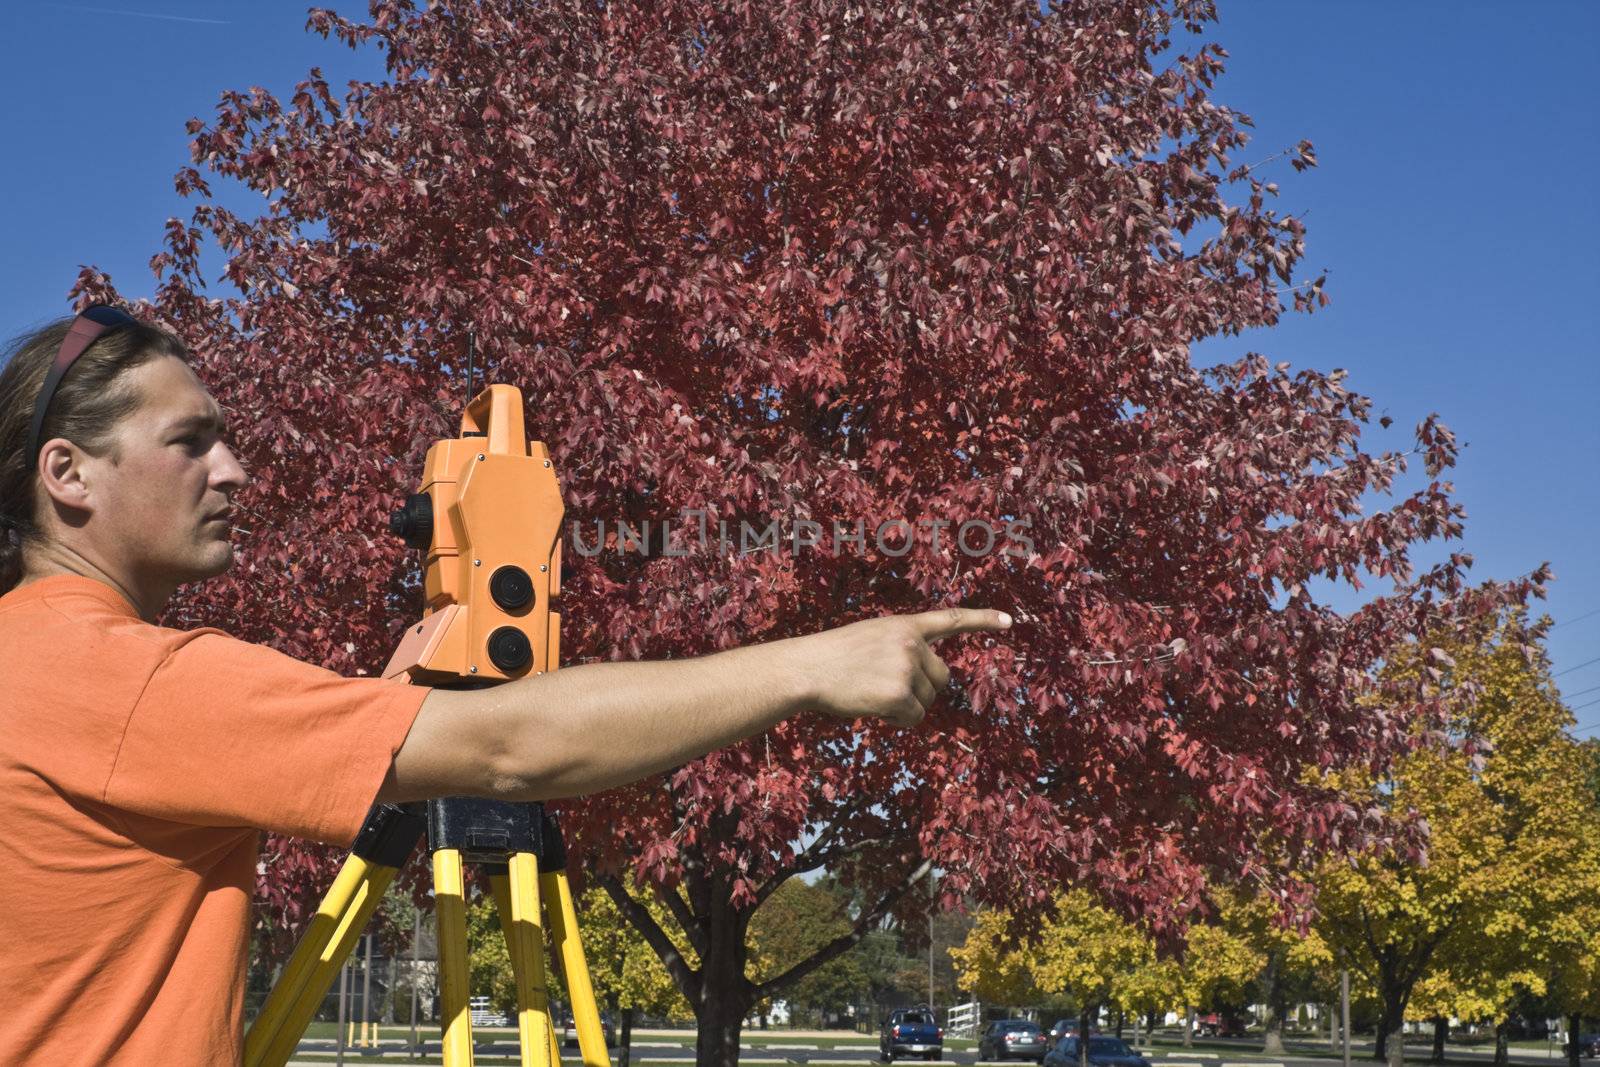 Surveyor with theodolite during colorful fall